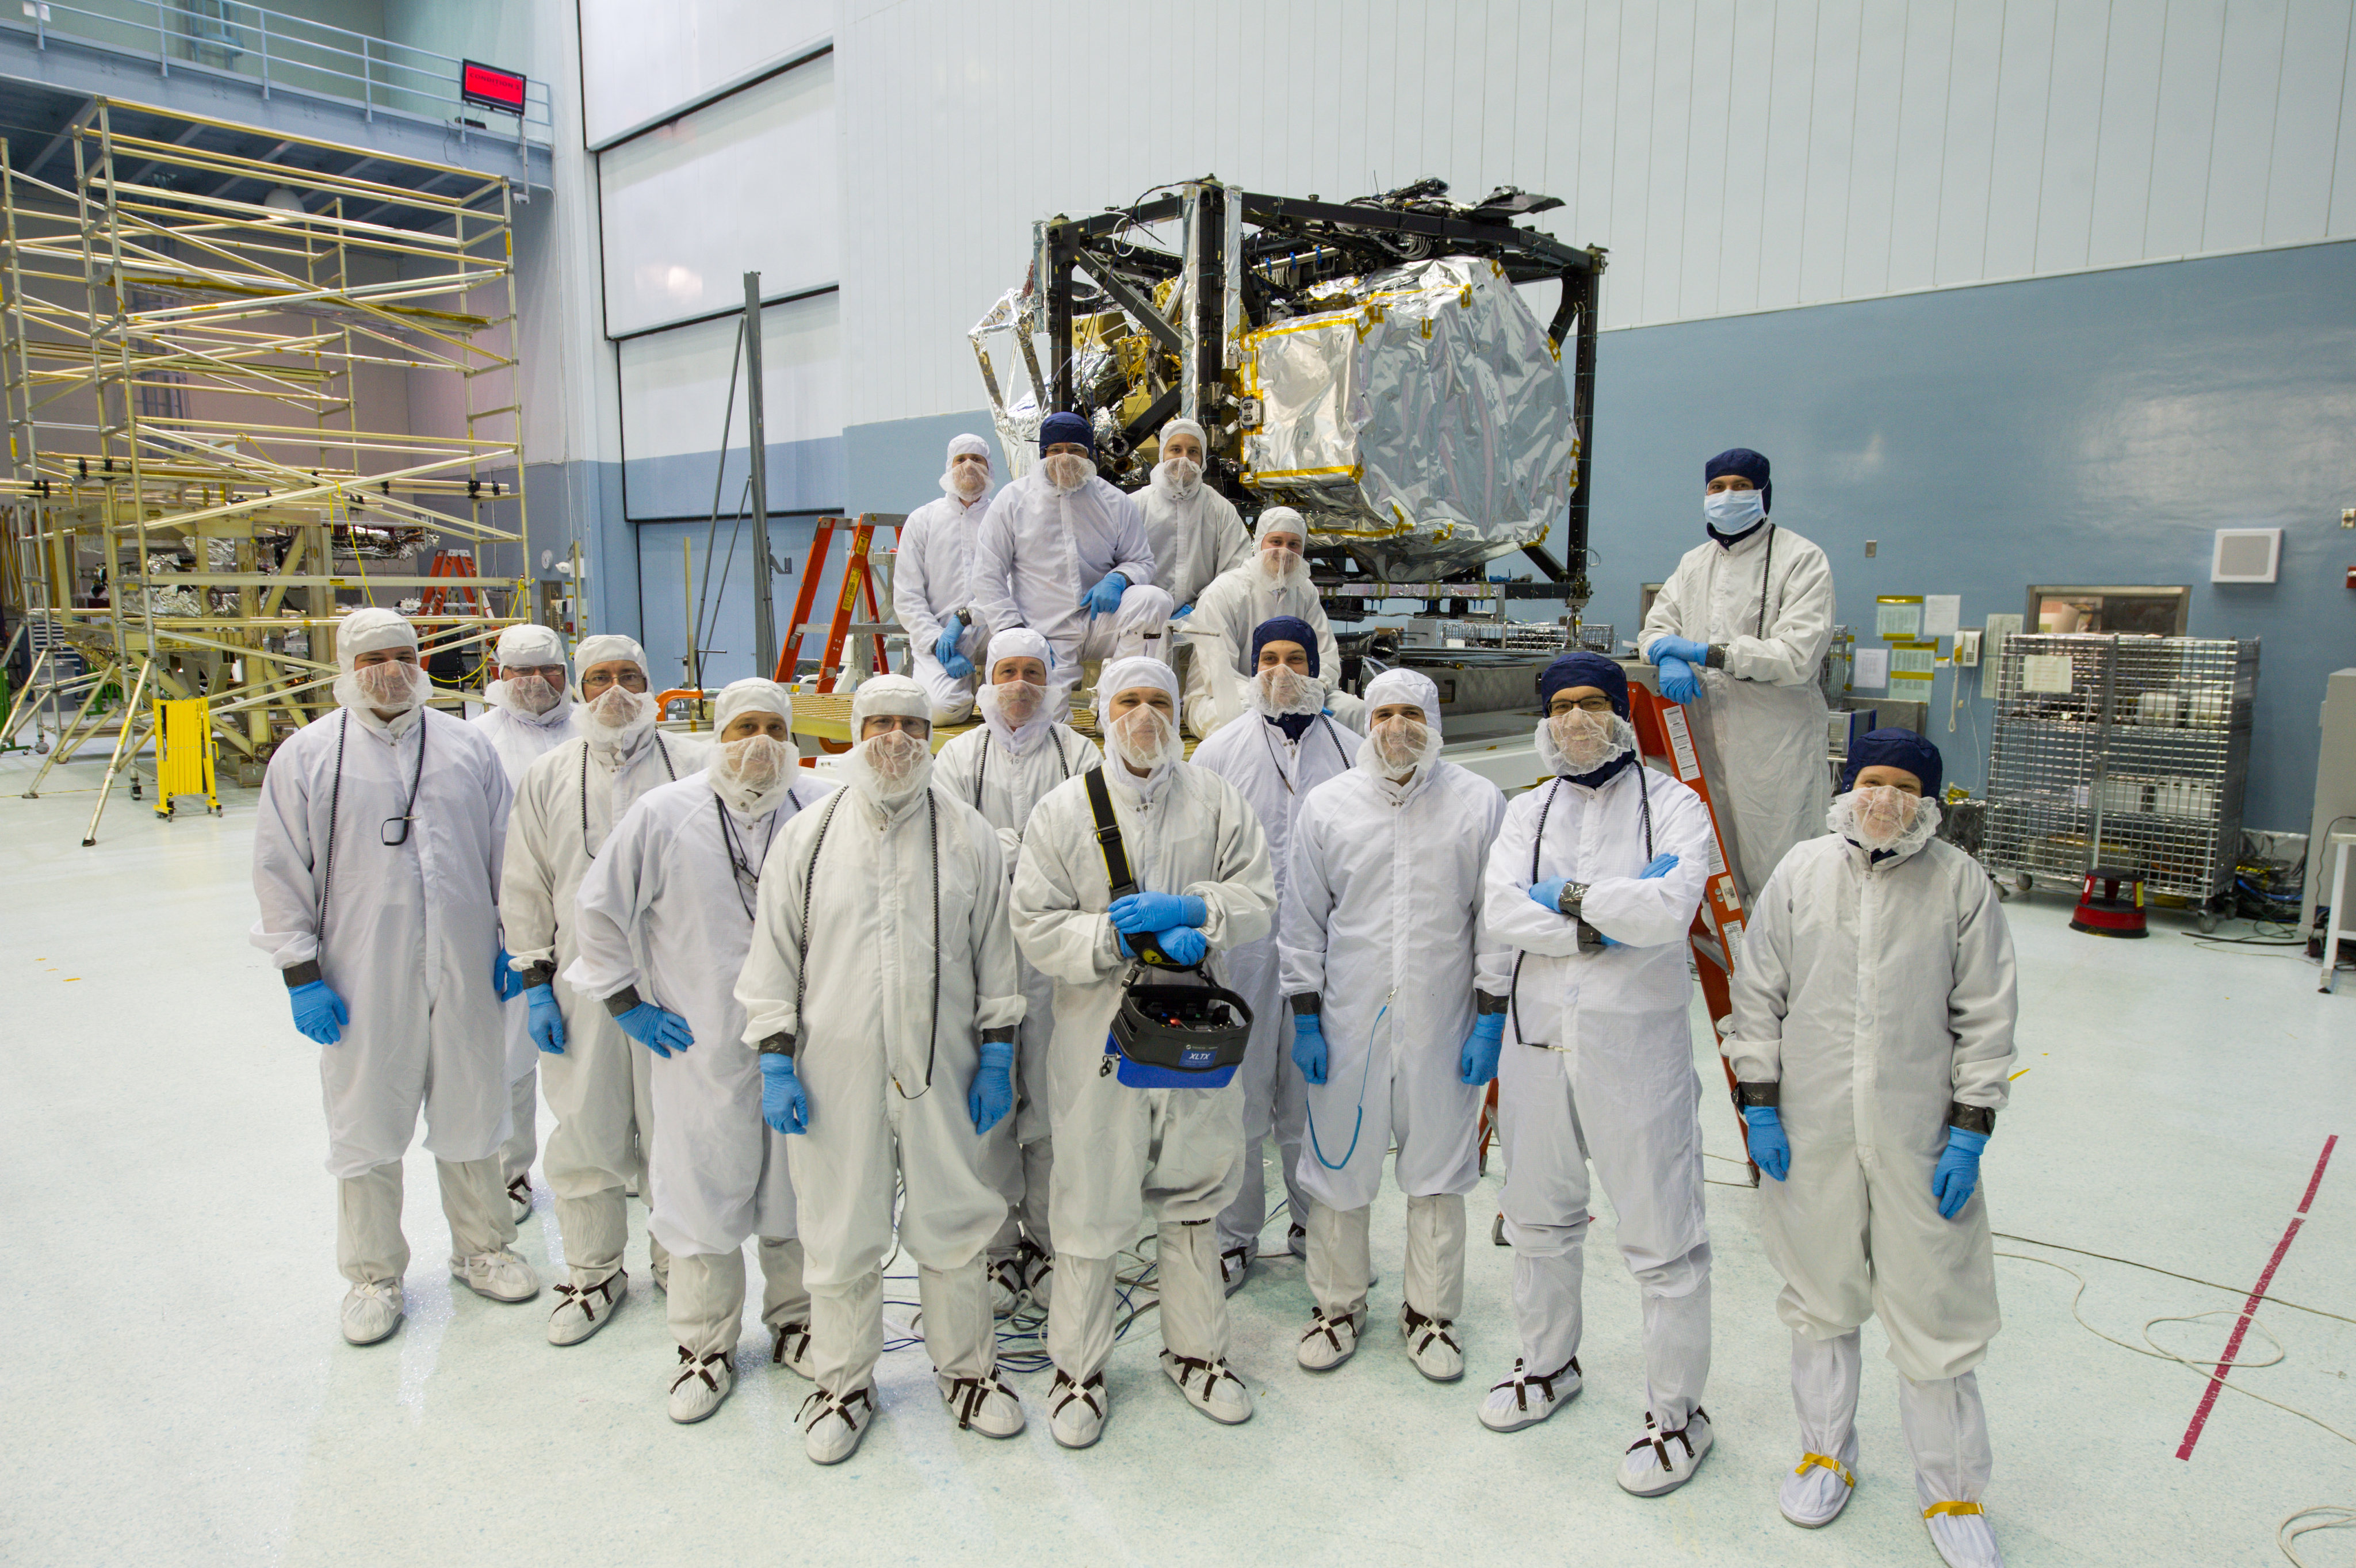 JWST Team Photo with Completed Flight Instrument module"